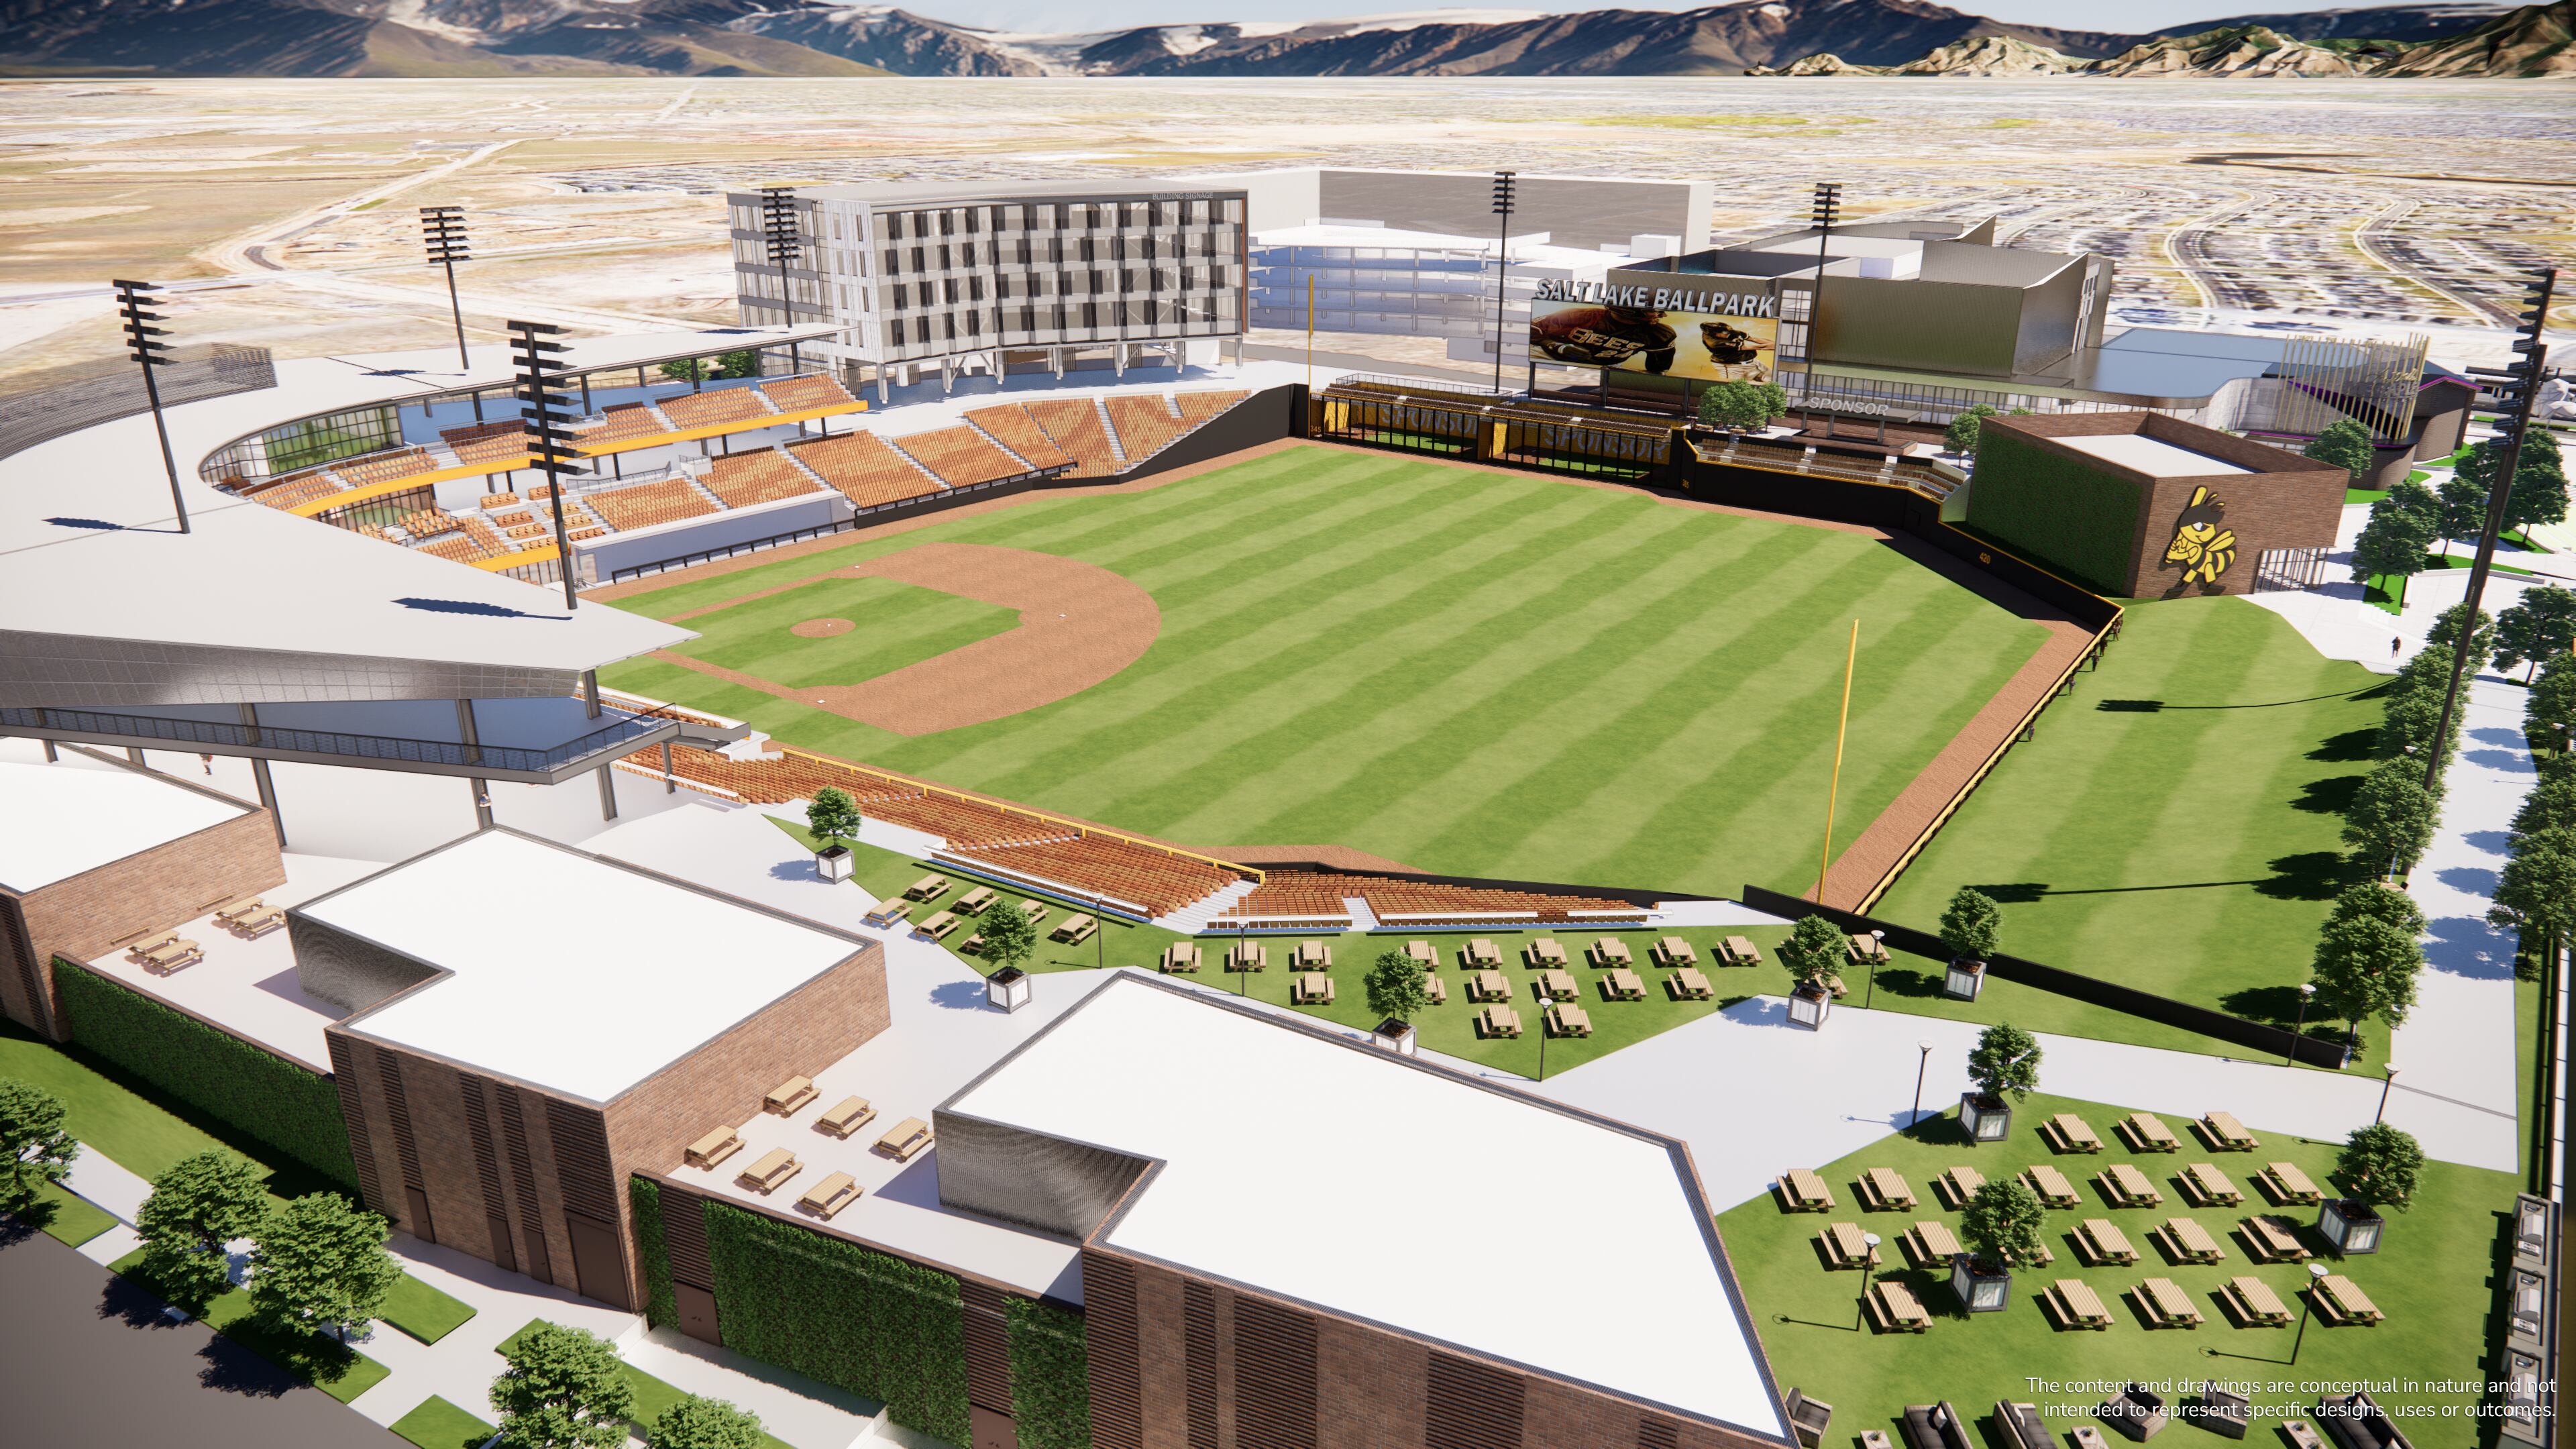 Will Salt Lake Bees fans support the team in Daybreak?